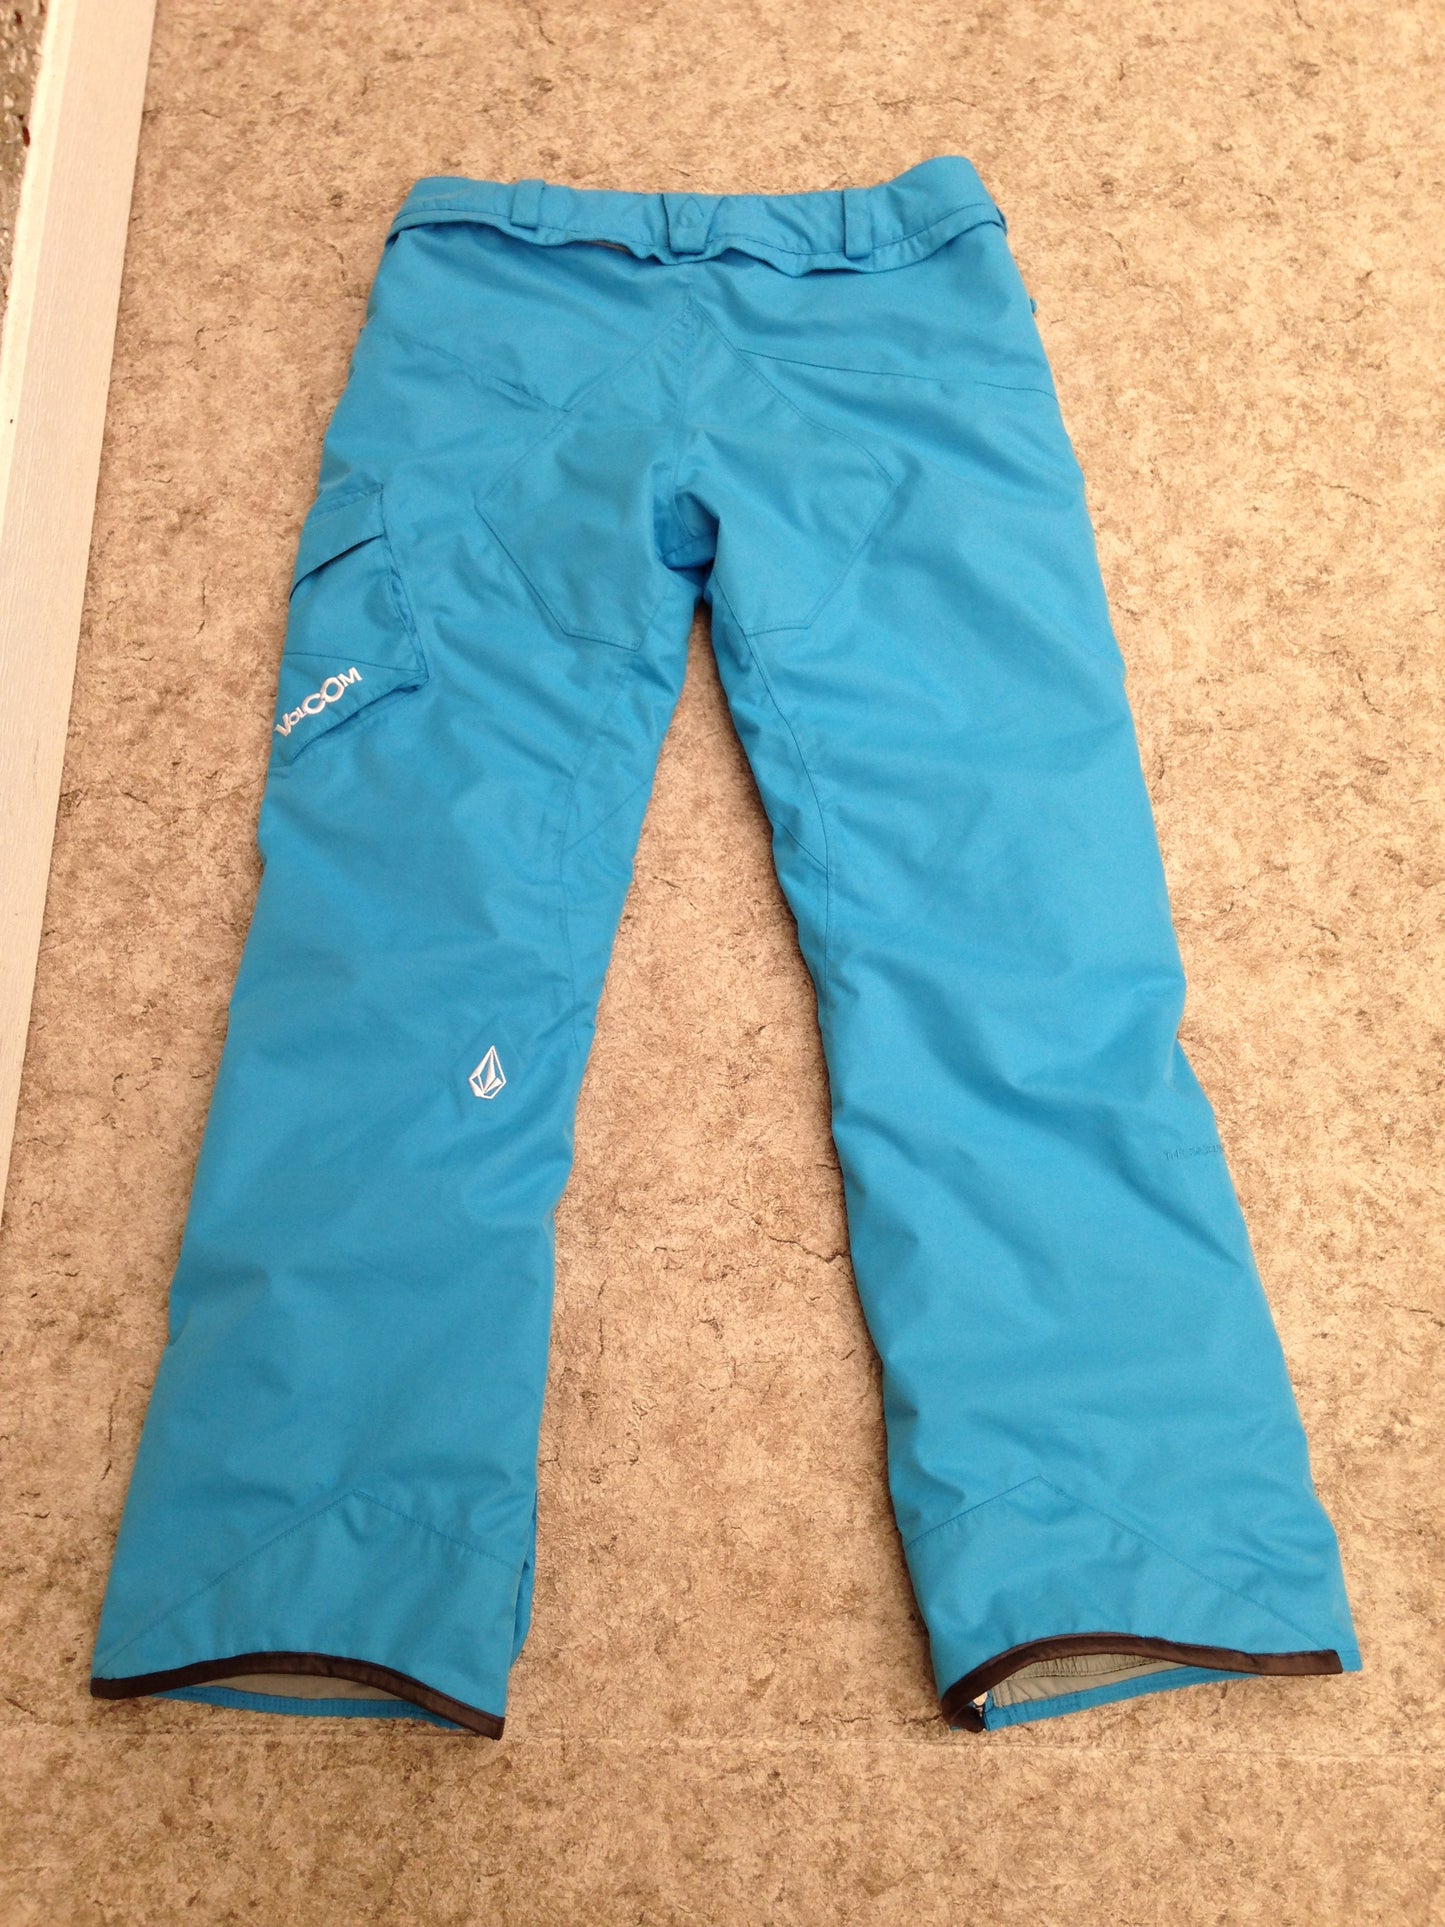 Snow Pants Men's Size Large Volcom Ocean Blue Insulated Snowboarding New Demo Model